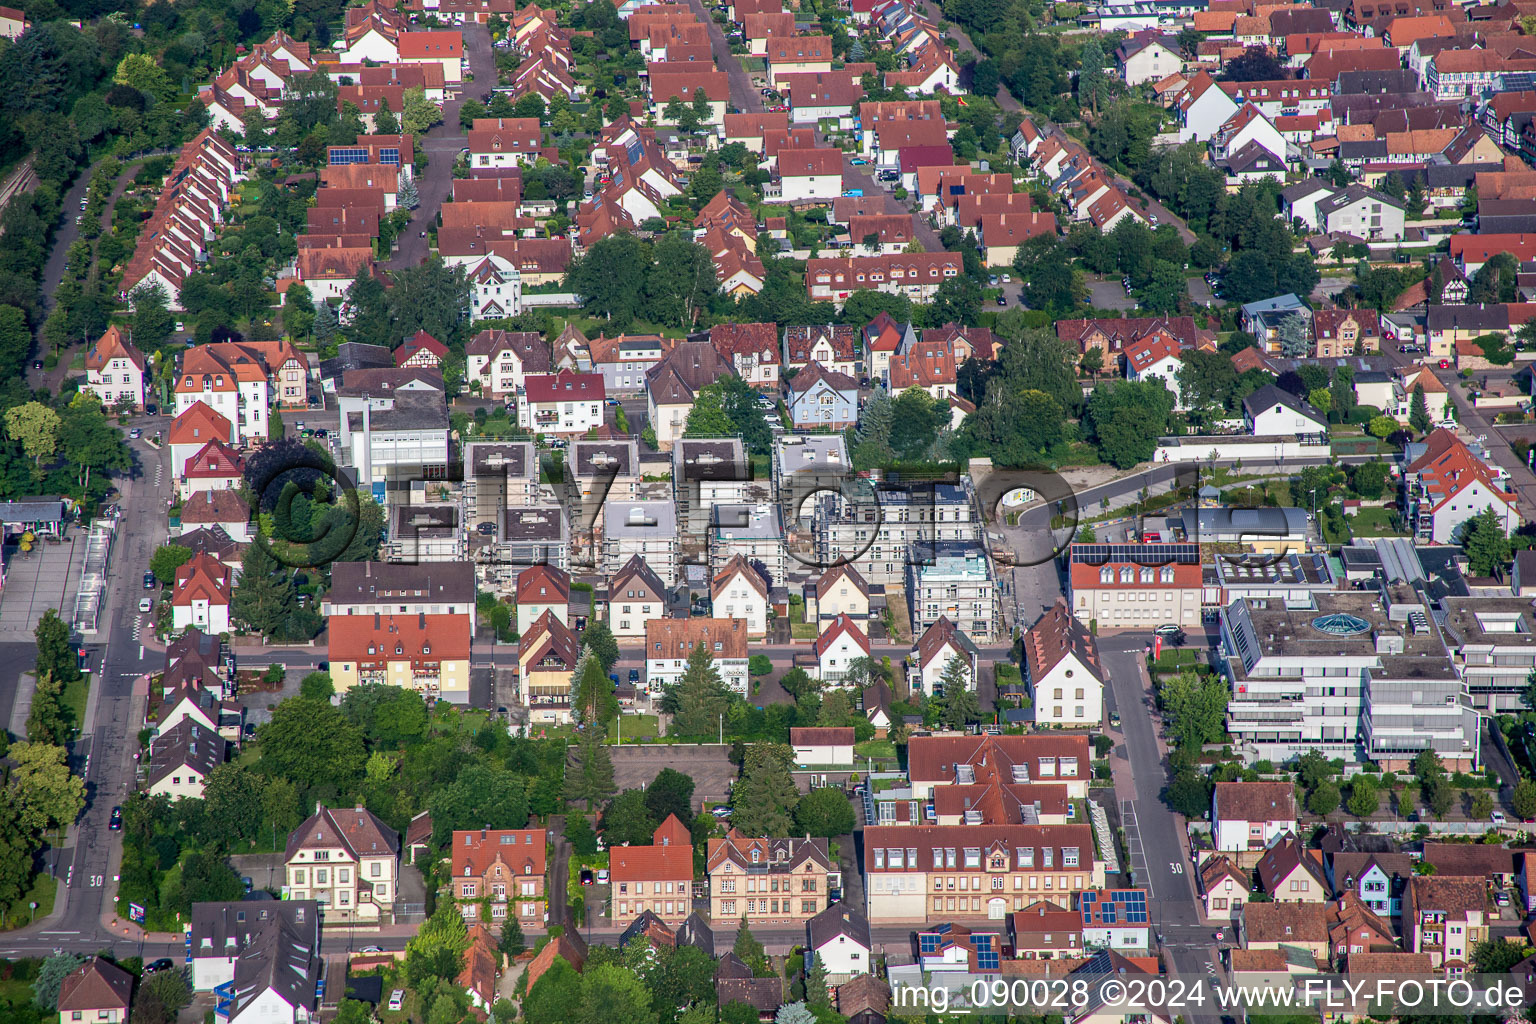 Construction site for City Quarters Building 'Im Stadtkern' in Kandel in the state Rhineland-Palatinate, Germany viewn from the air